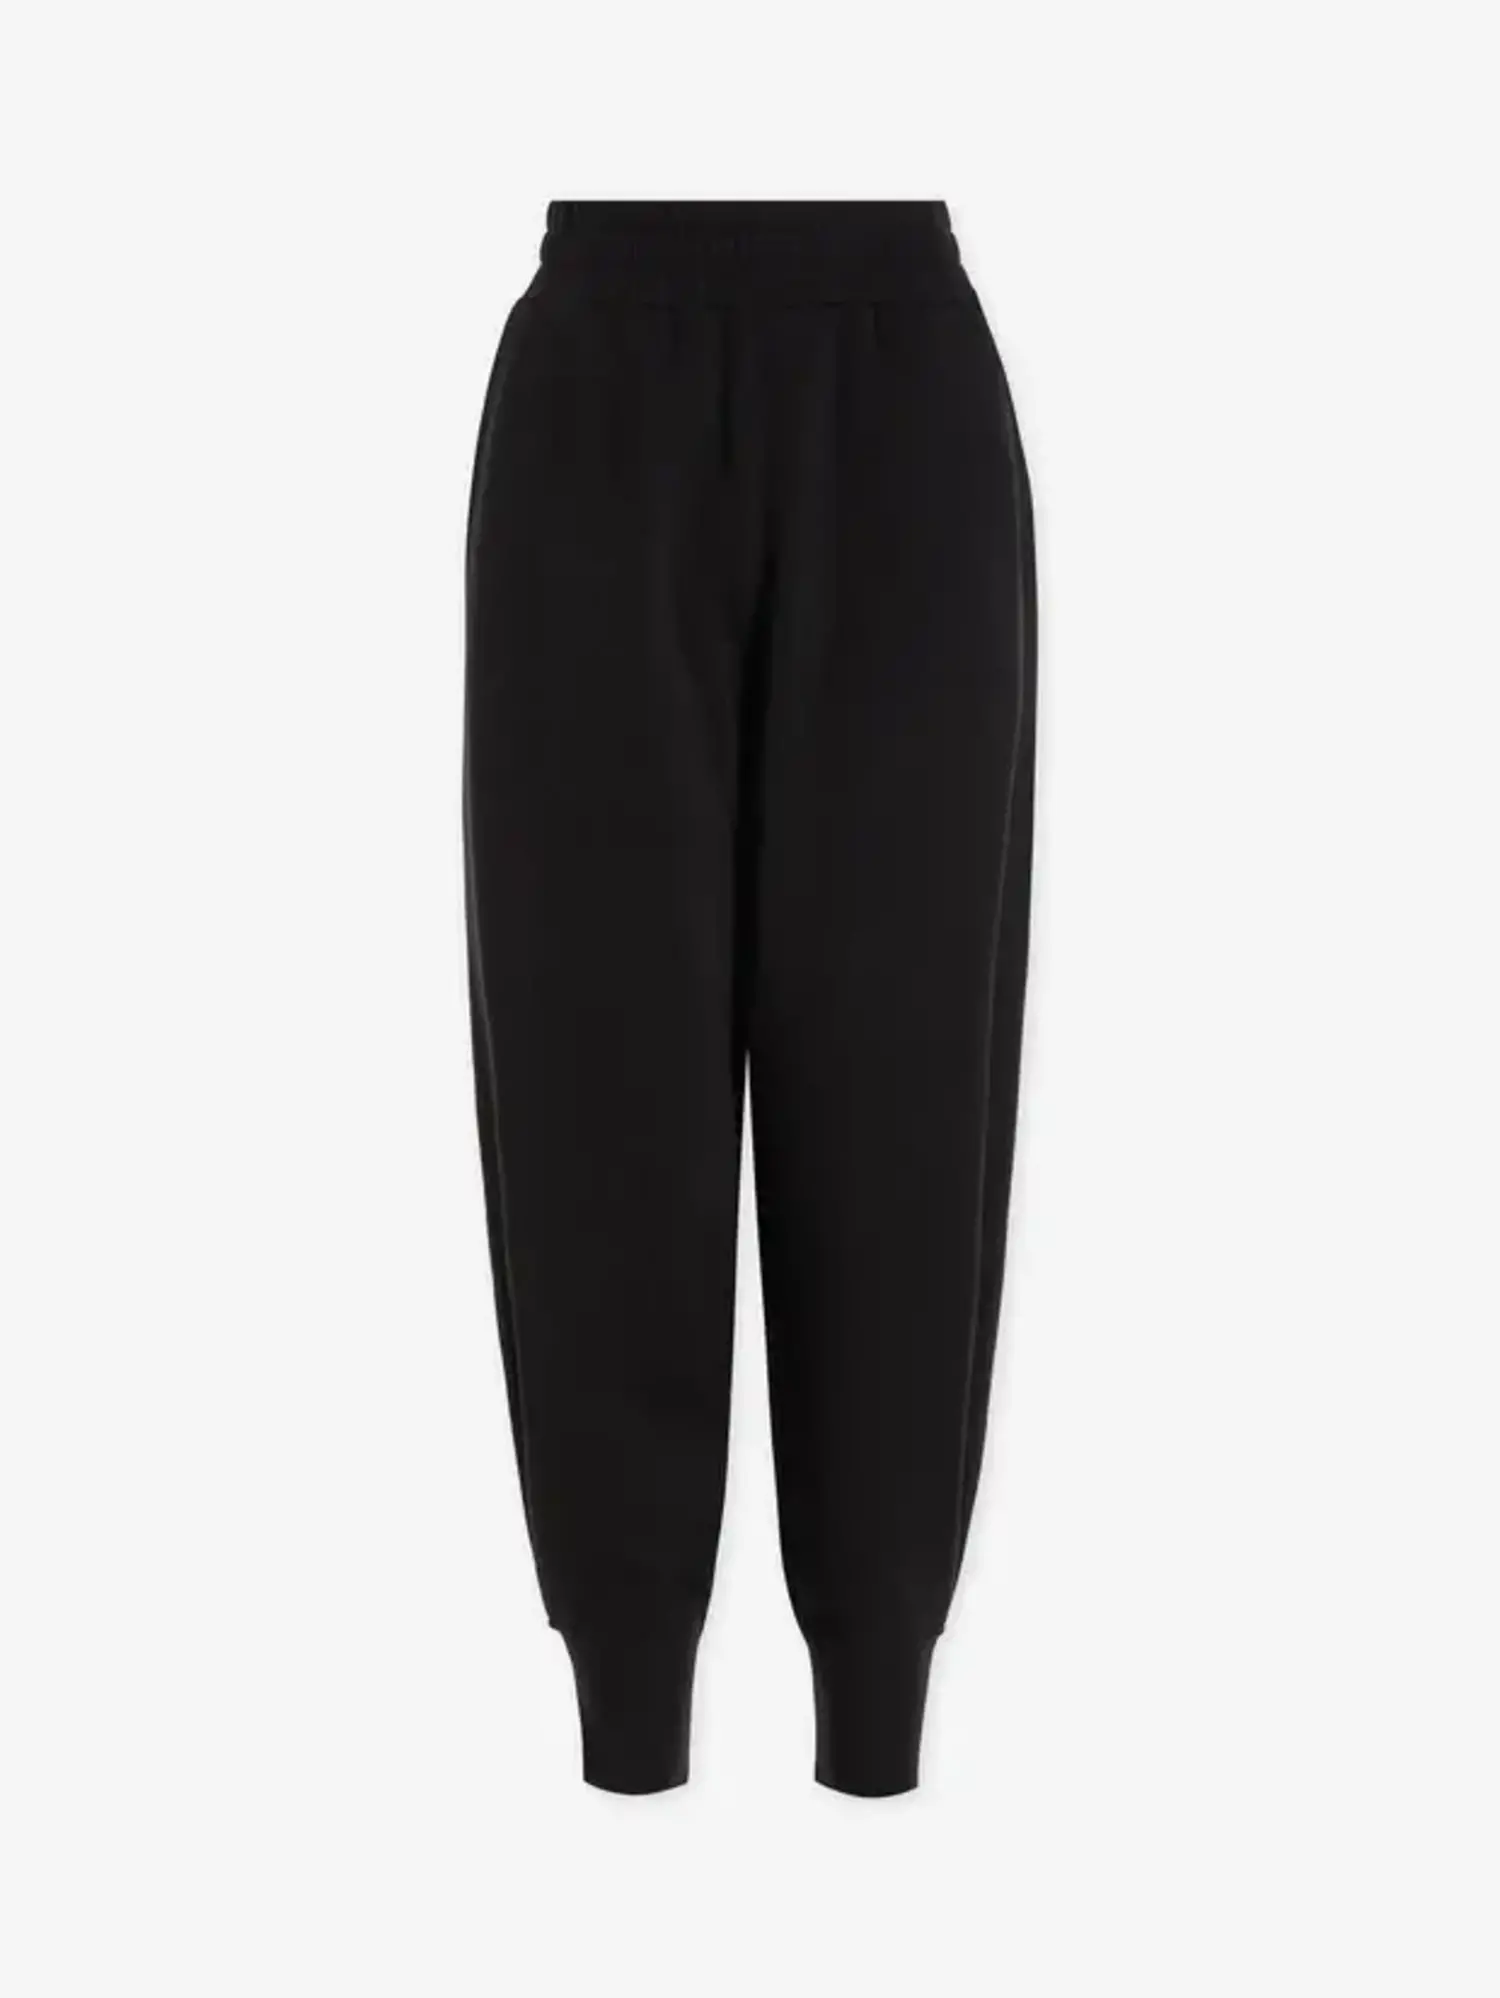 Varley  The Relaxed Pant 27.5 Black - Tryst Boutique